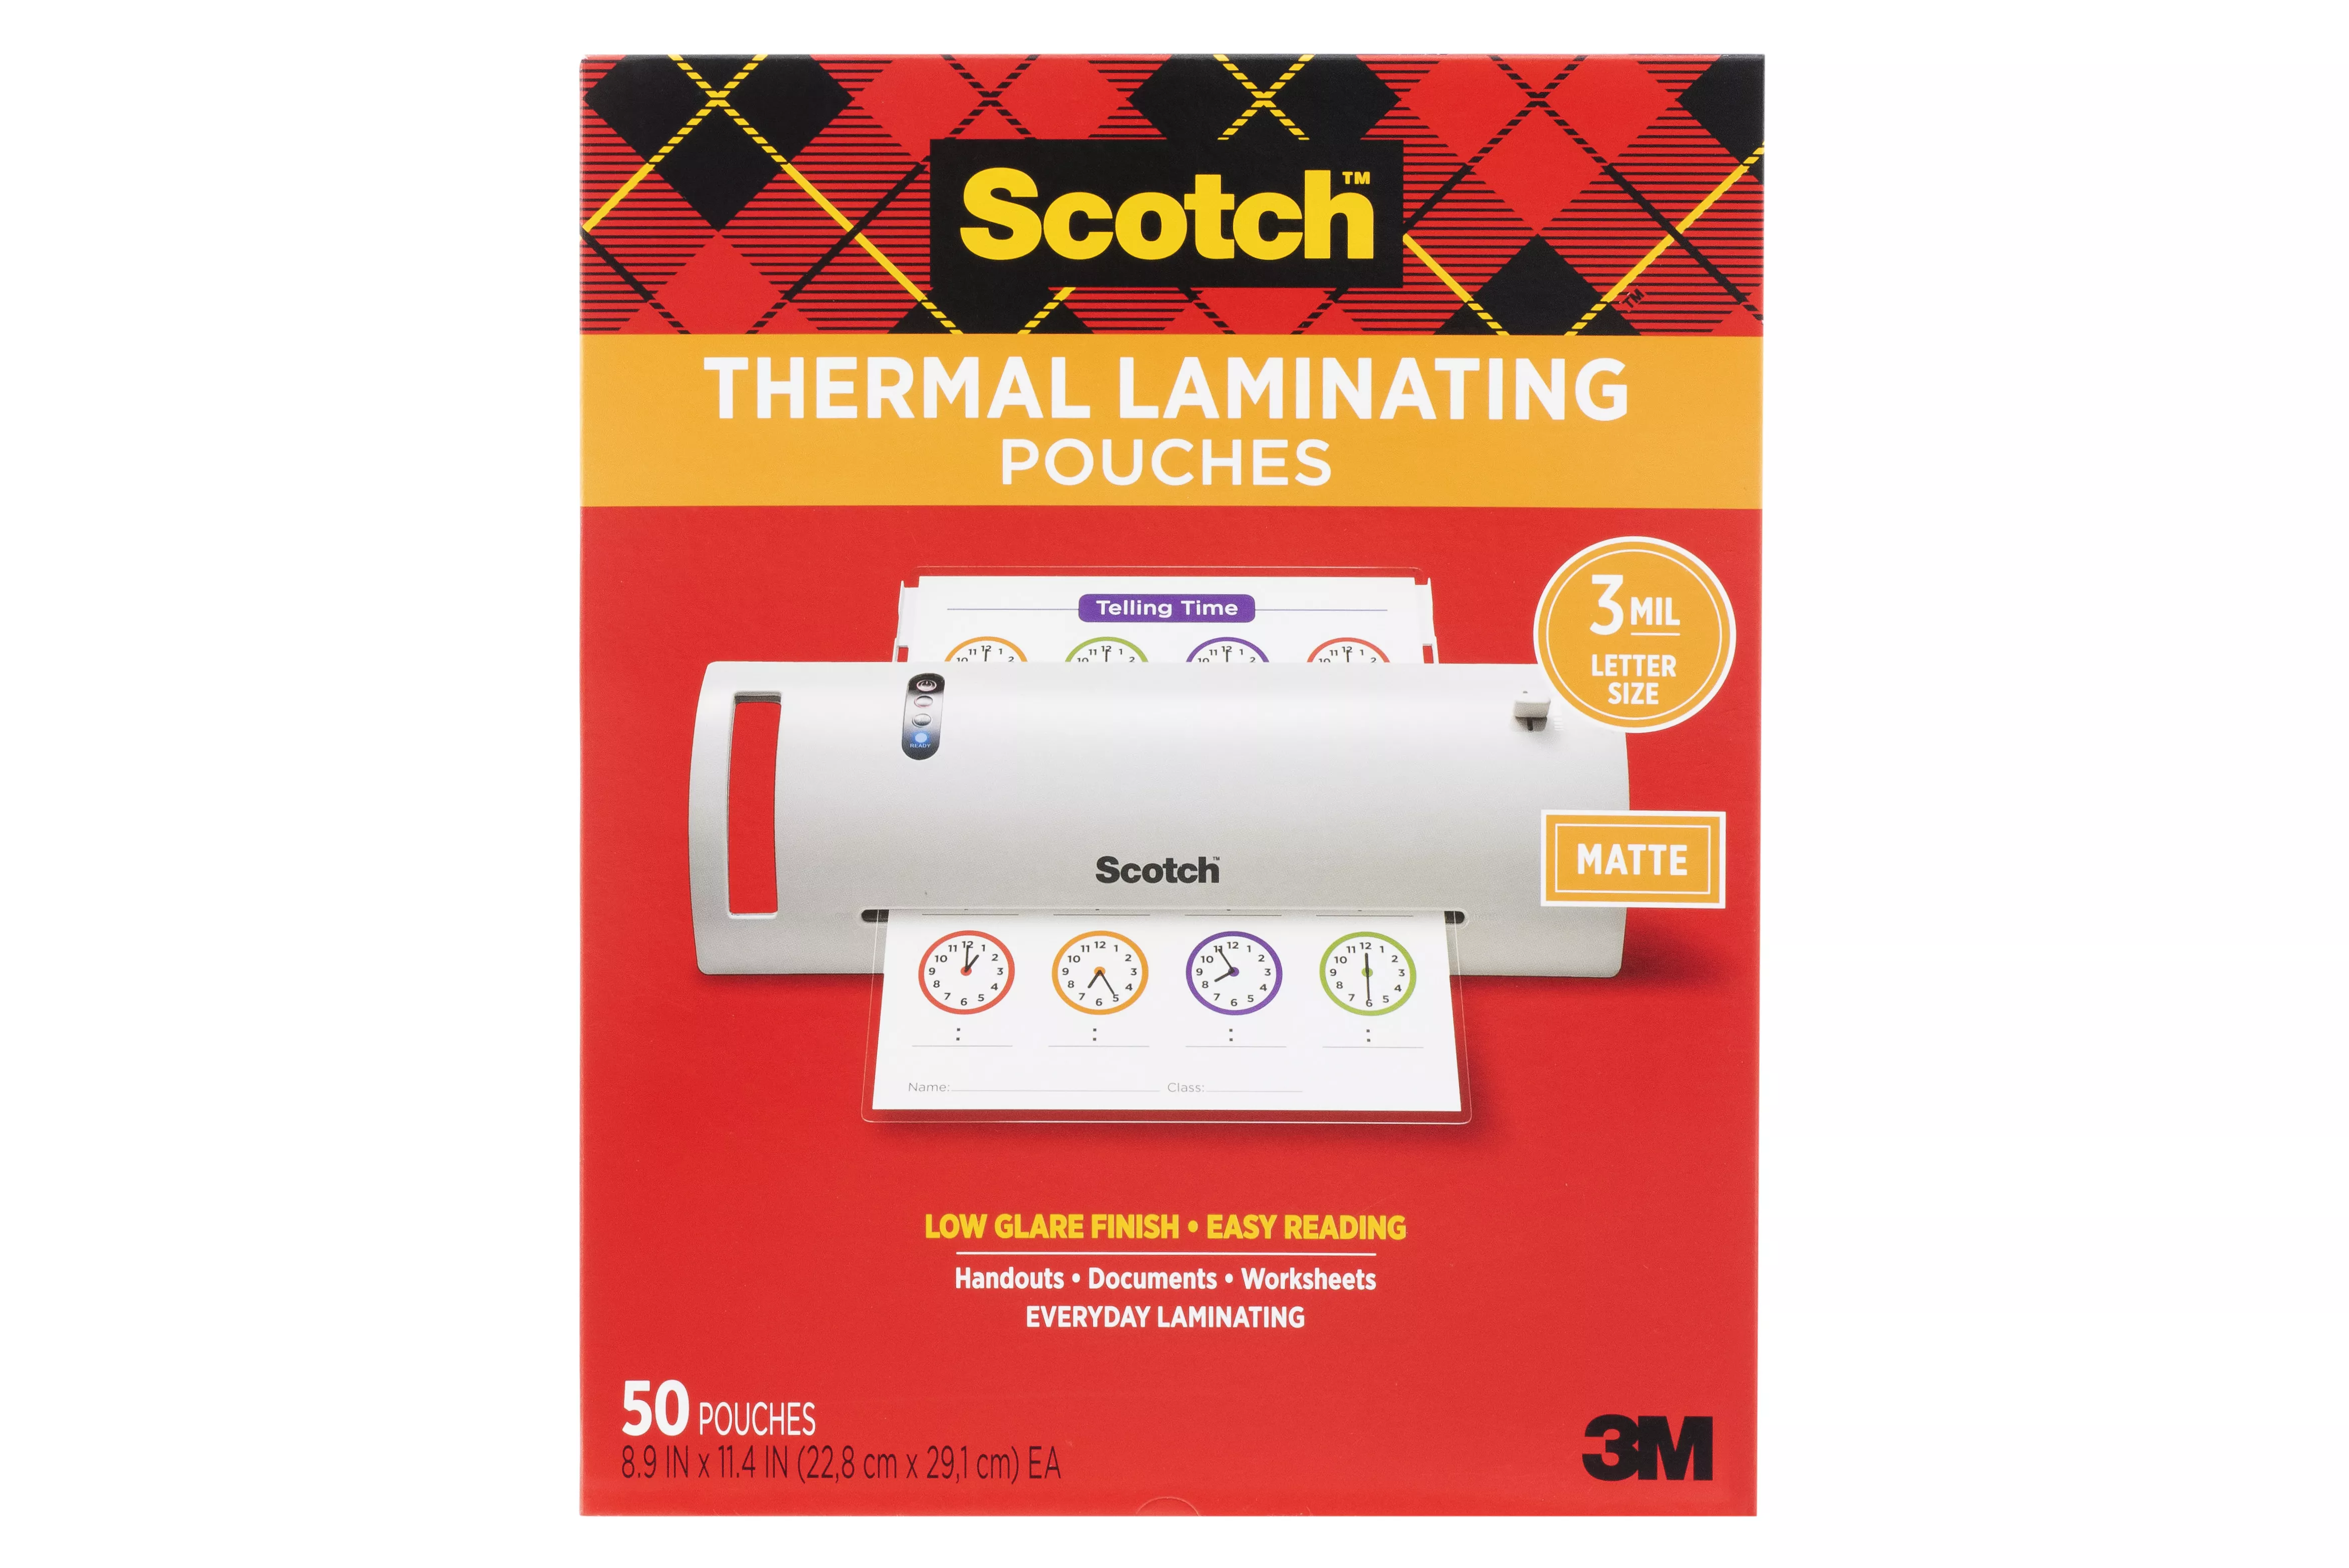 Scotch™ Thermal Laminating Pouches TP3854-50M, 8.9 in x 11.4 in (22.8 cm x 29.1 cm)